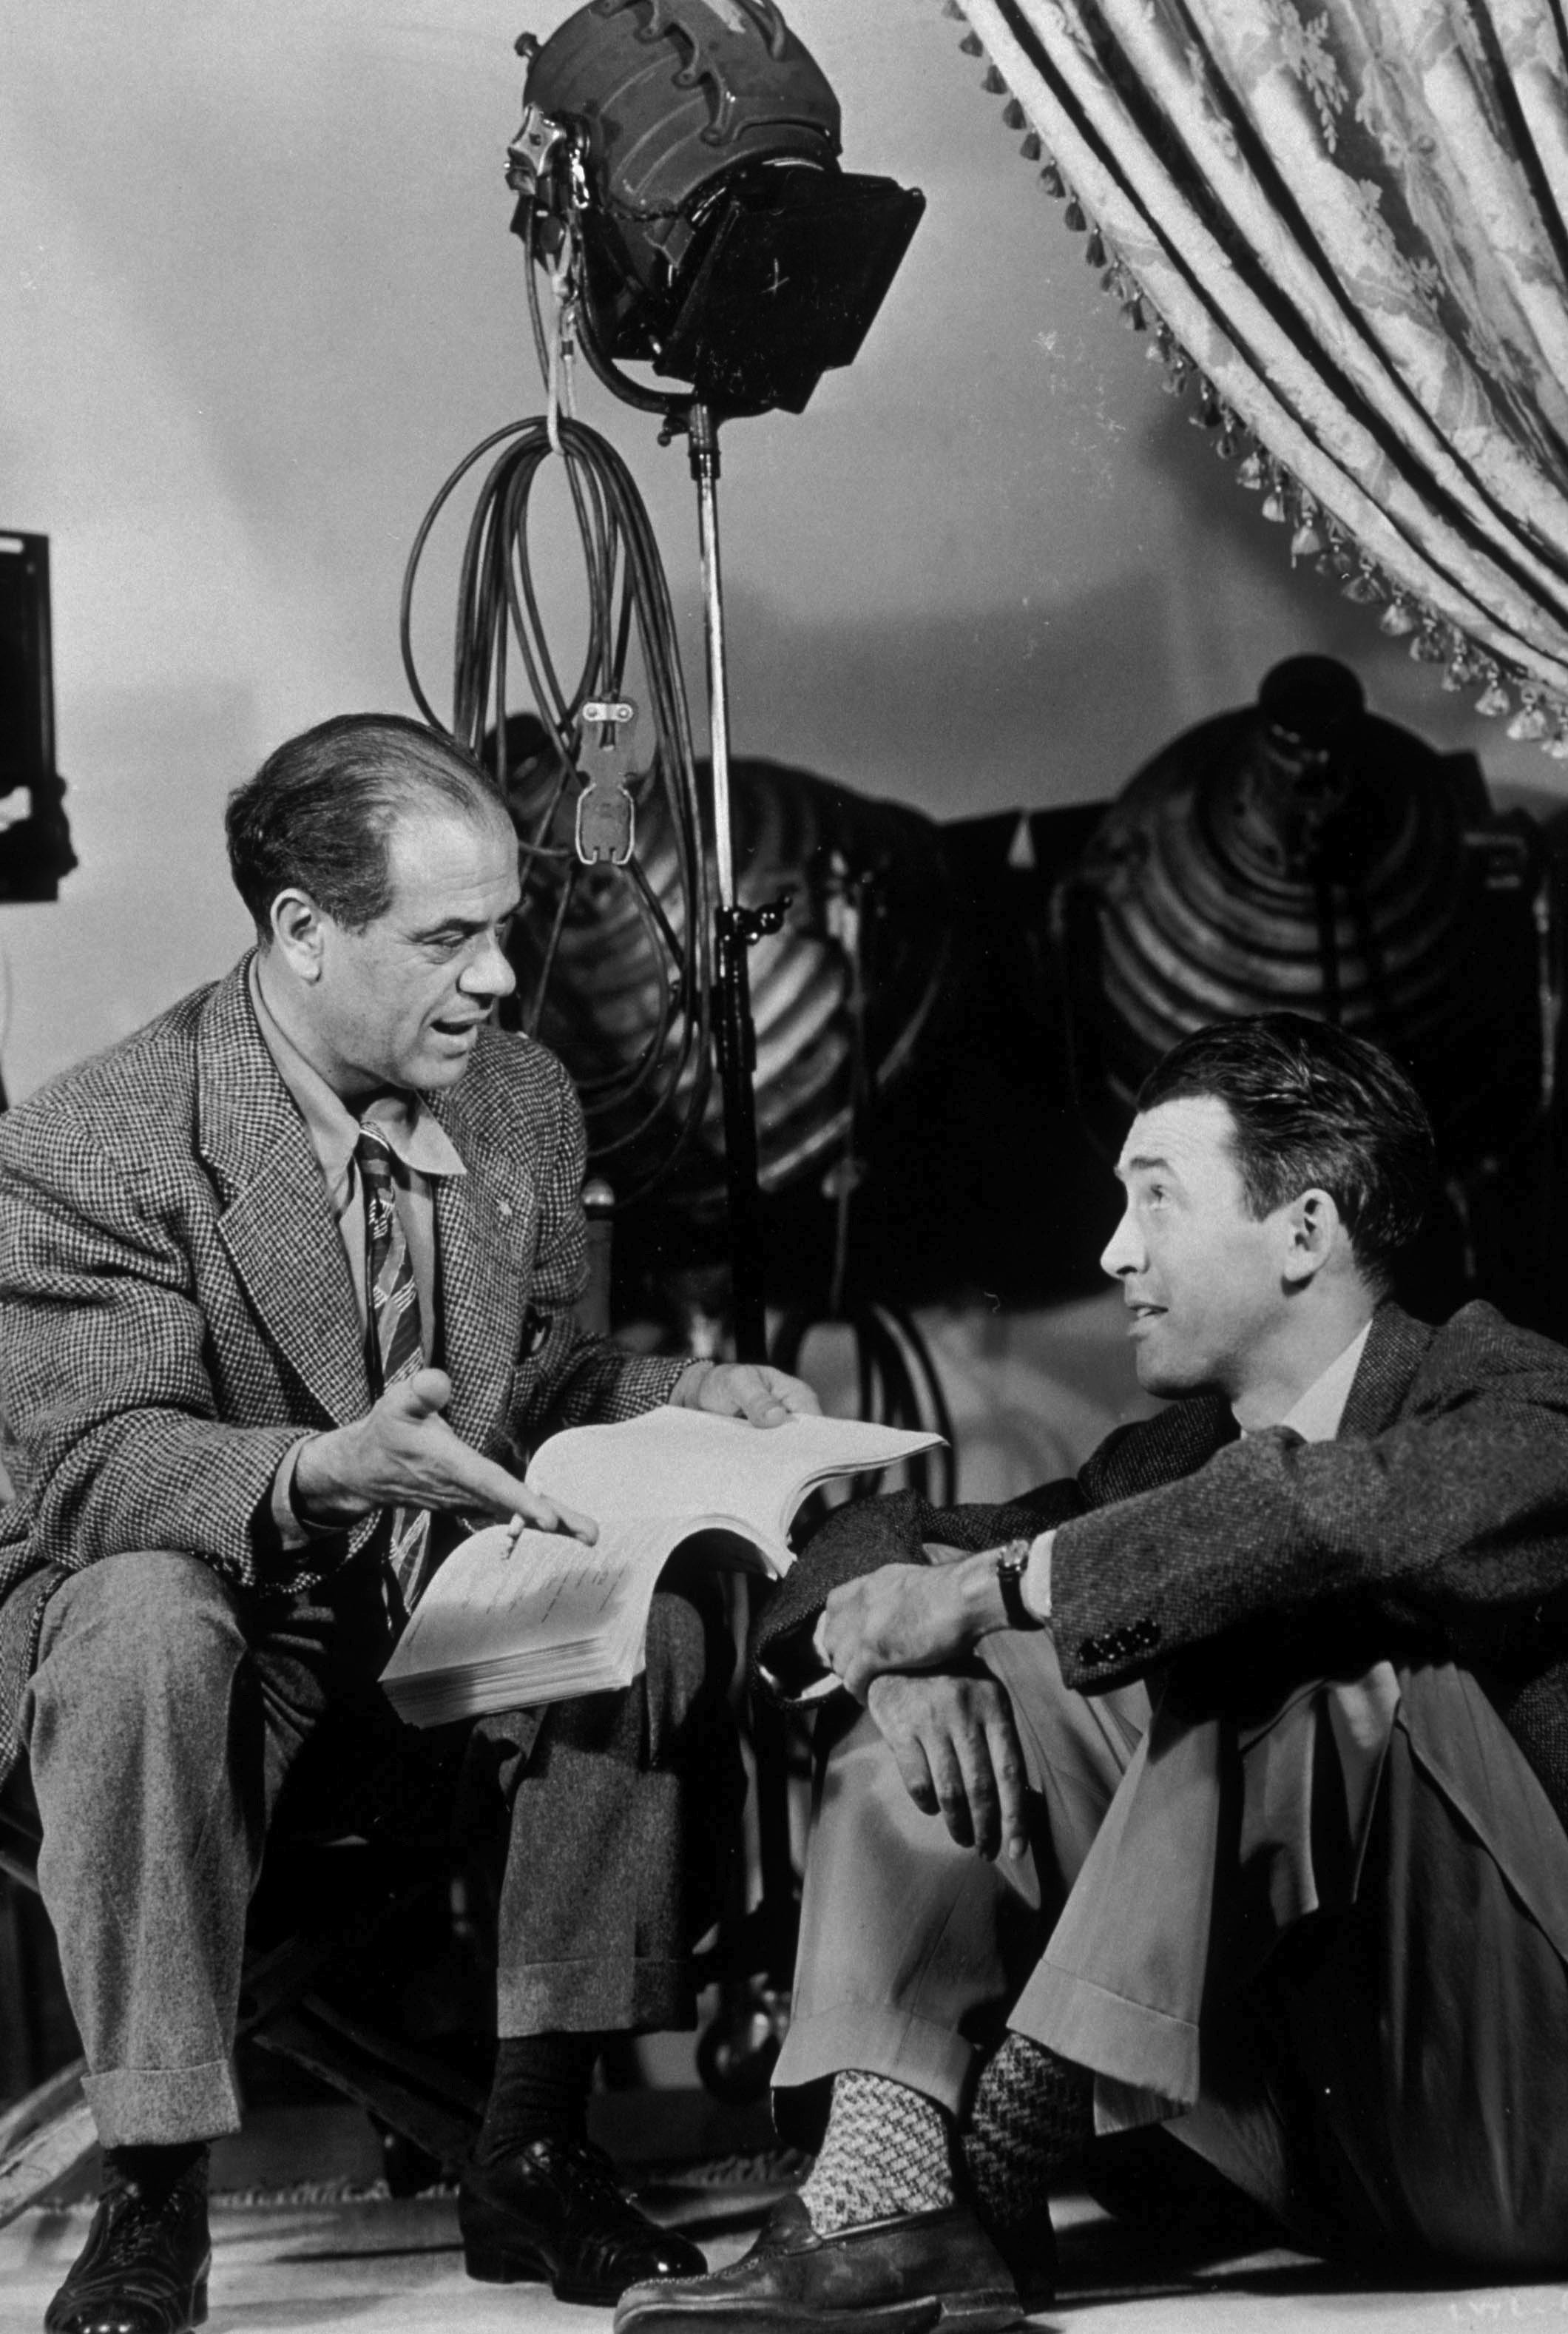 Capra and Stewart on the set of ‘It’s a Wonderful Life’